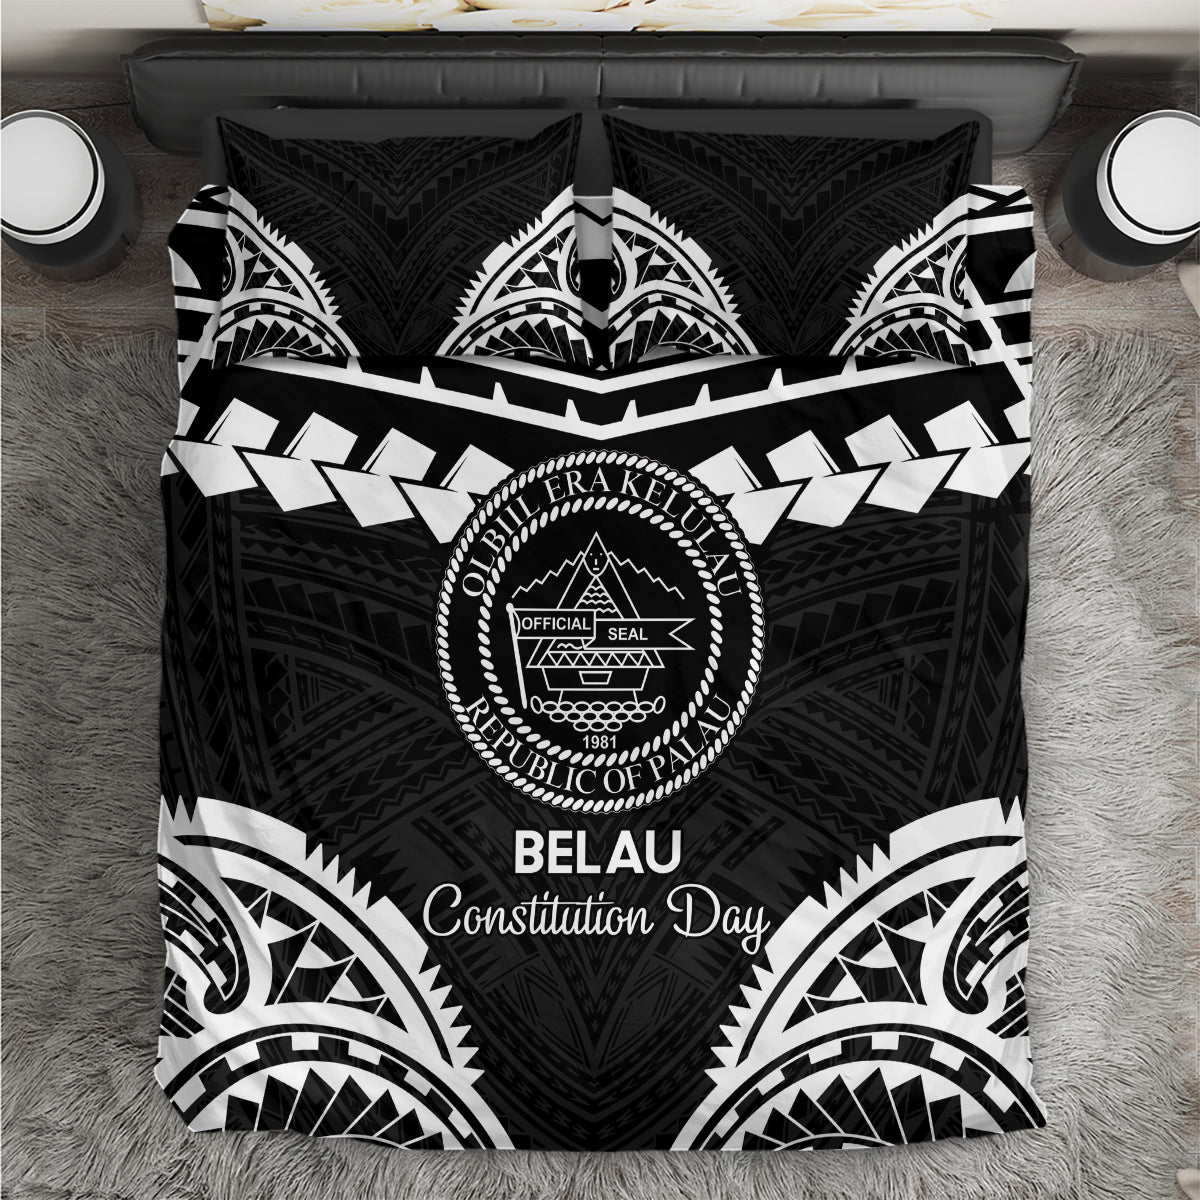 Palau Constitution Day Bedding Set Belau Seal With Polynesian Pattern - Black